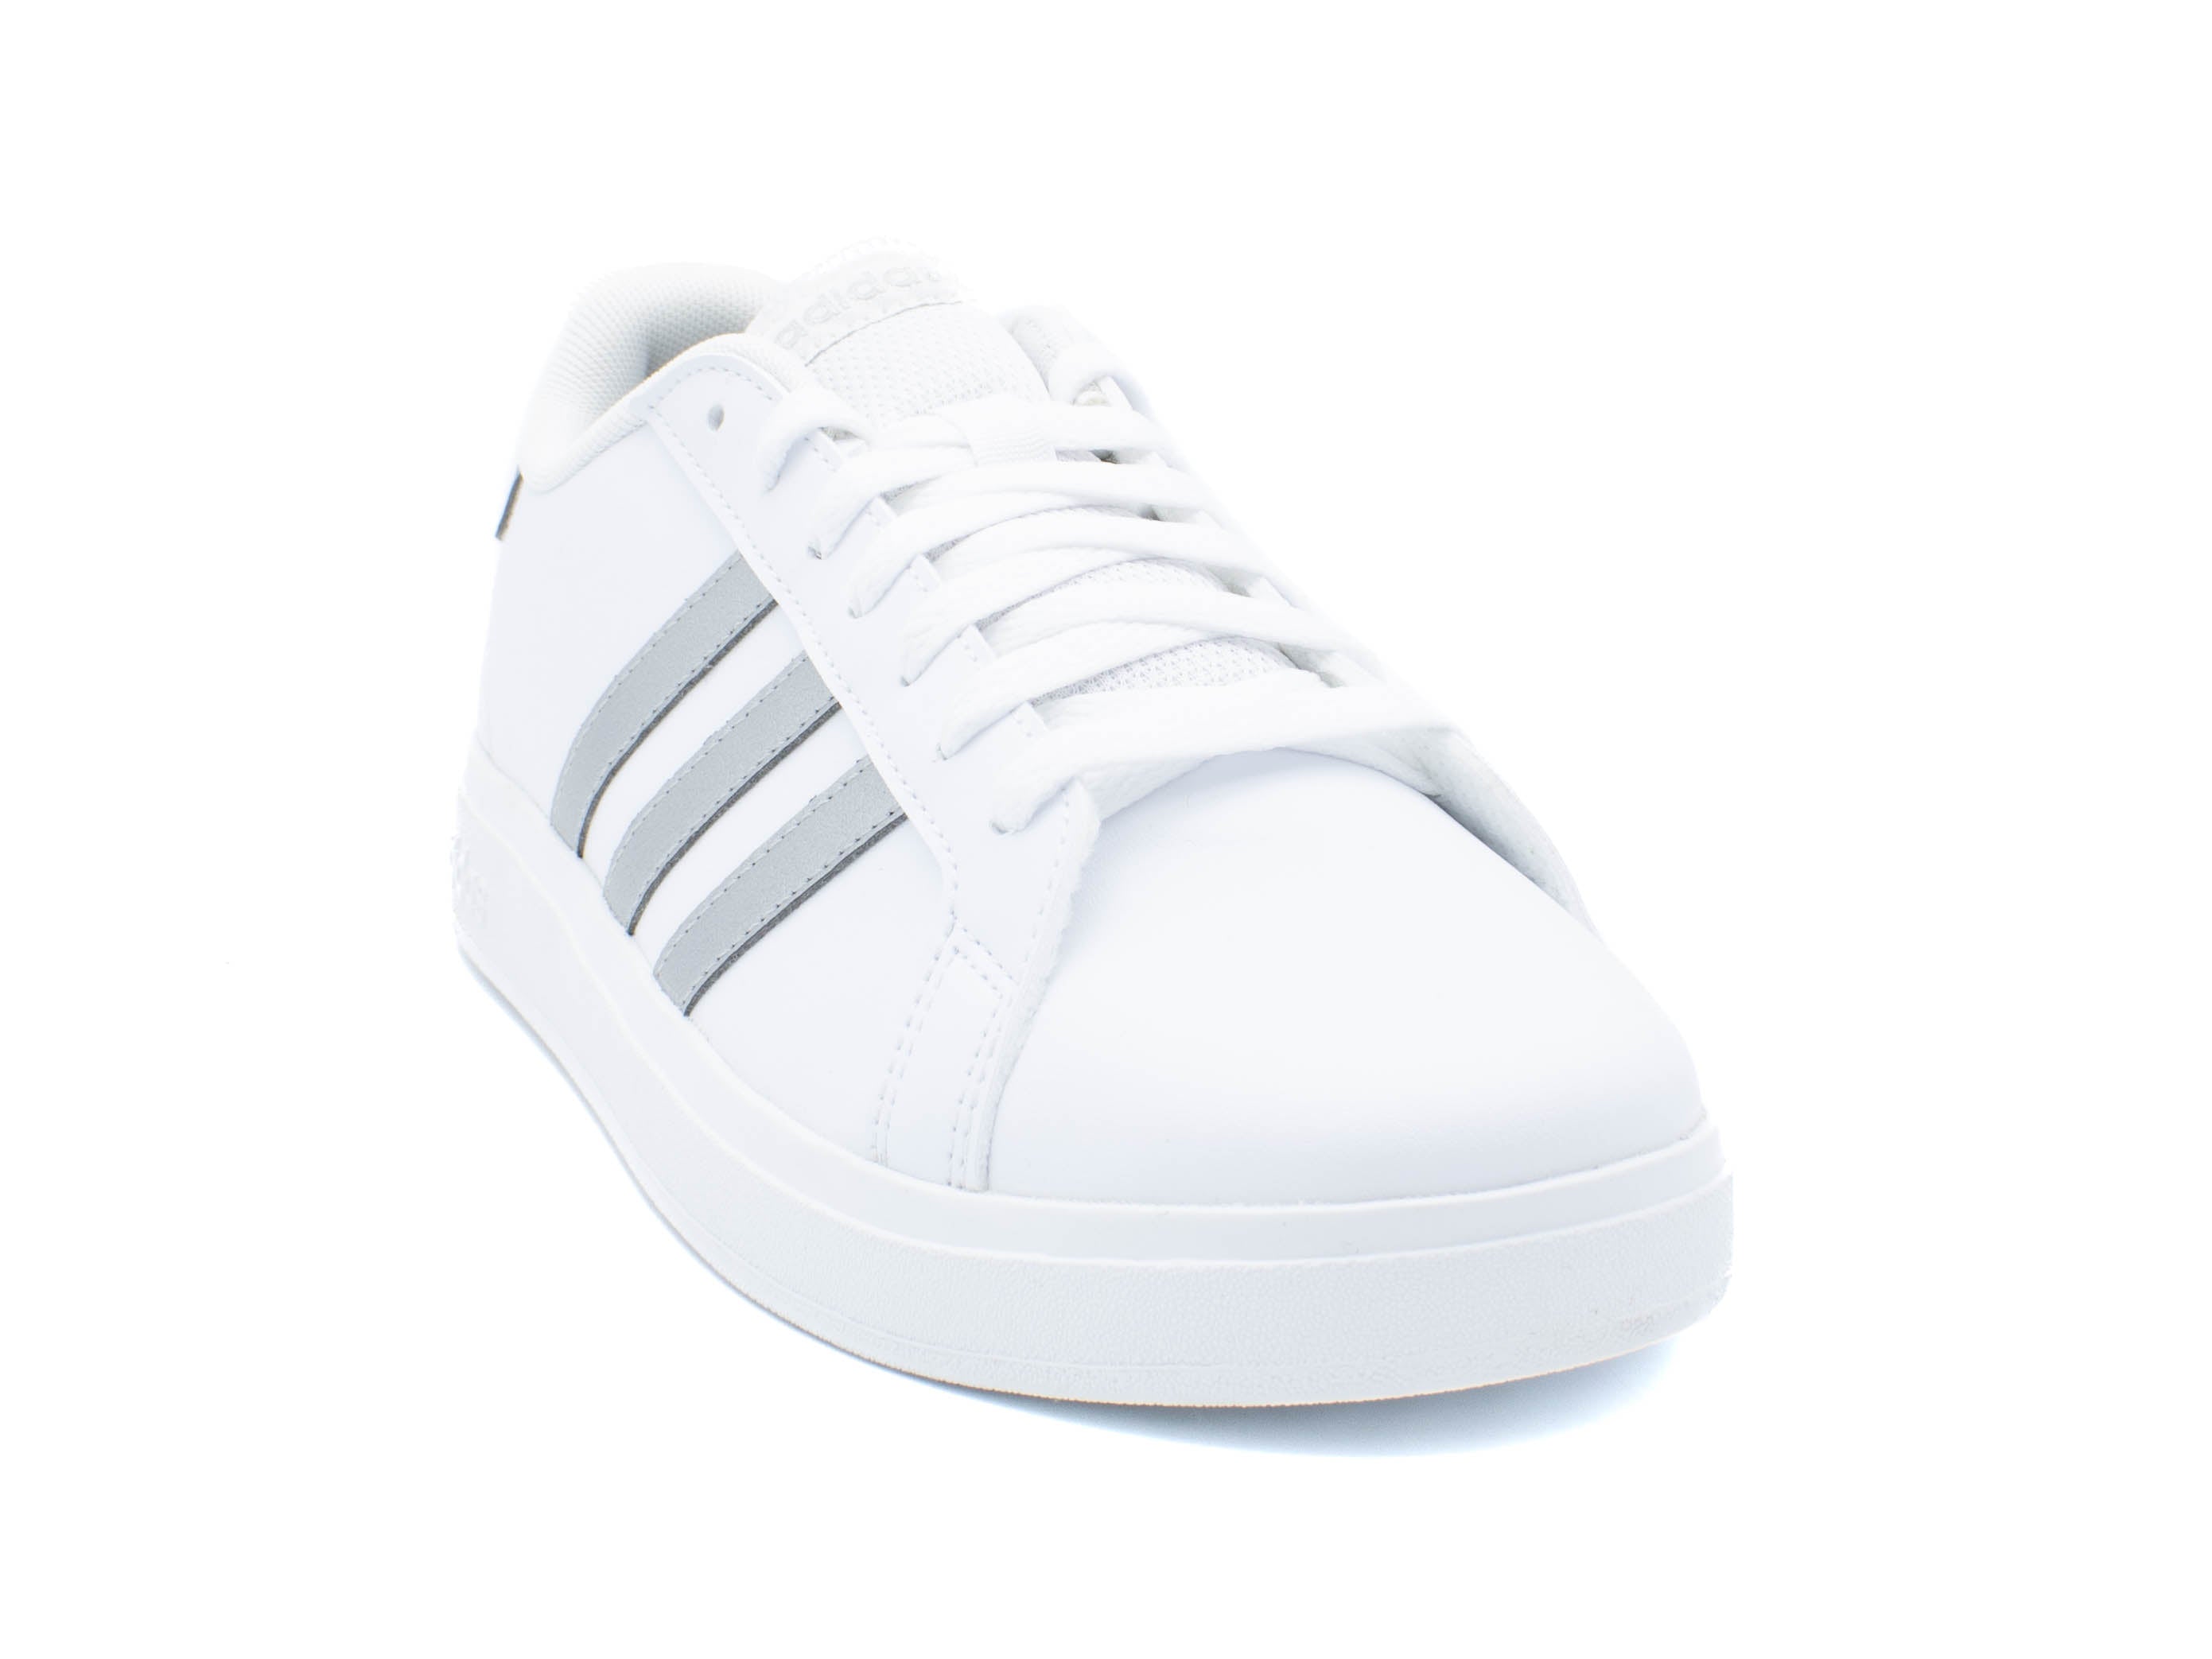 ADIDAS GRAND COURT LIFESTYLE TENNIS LACE-UP